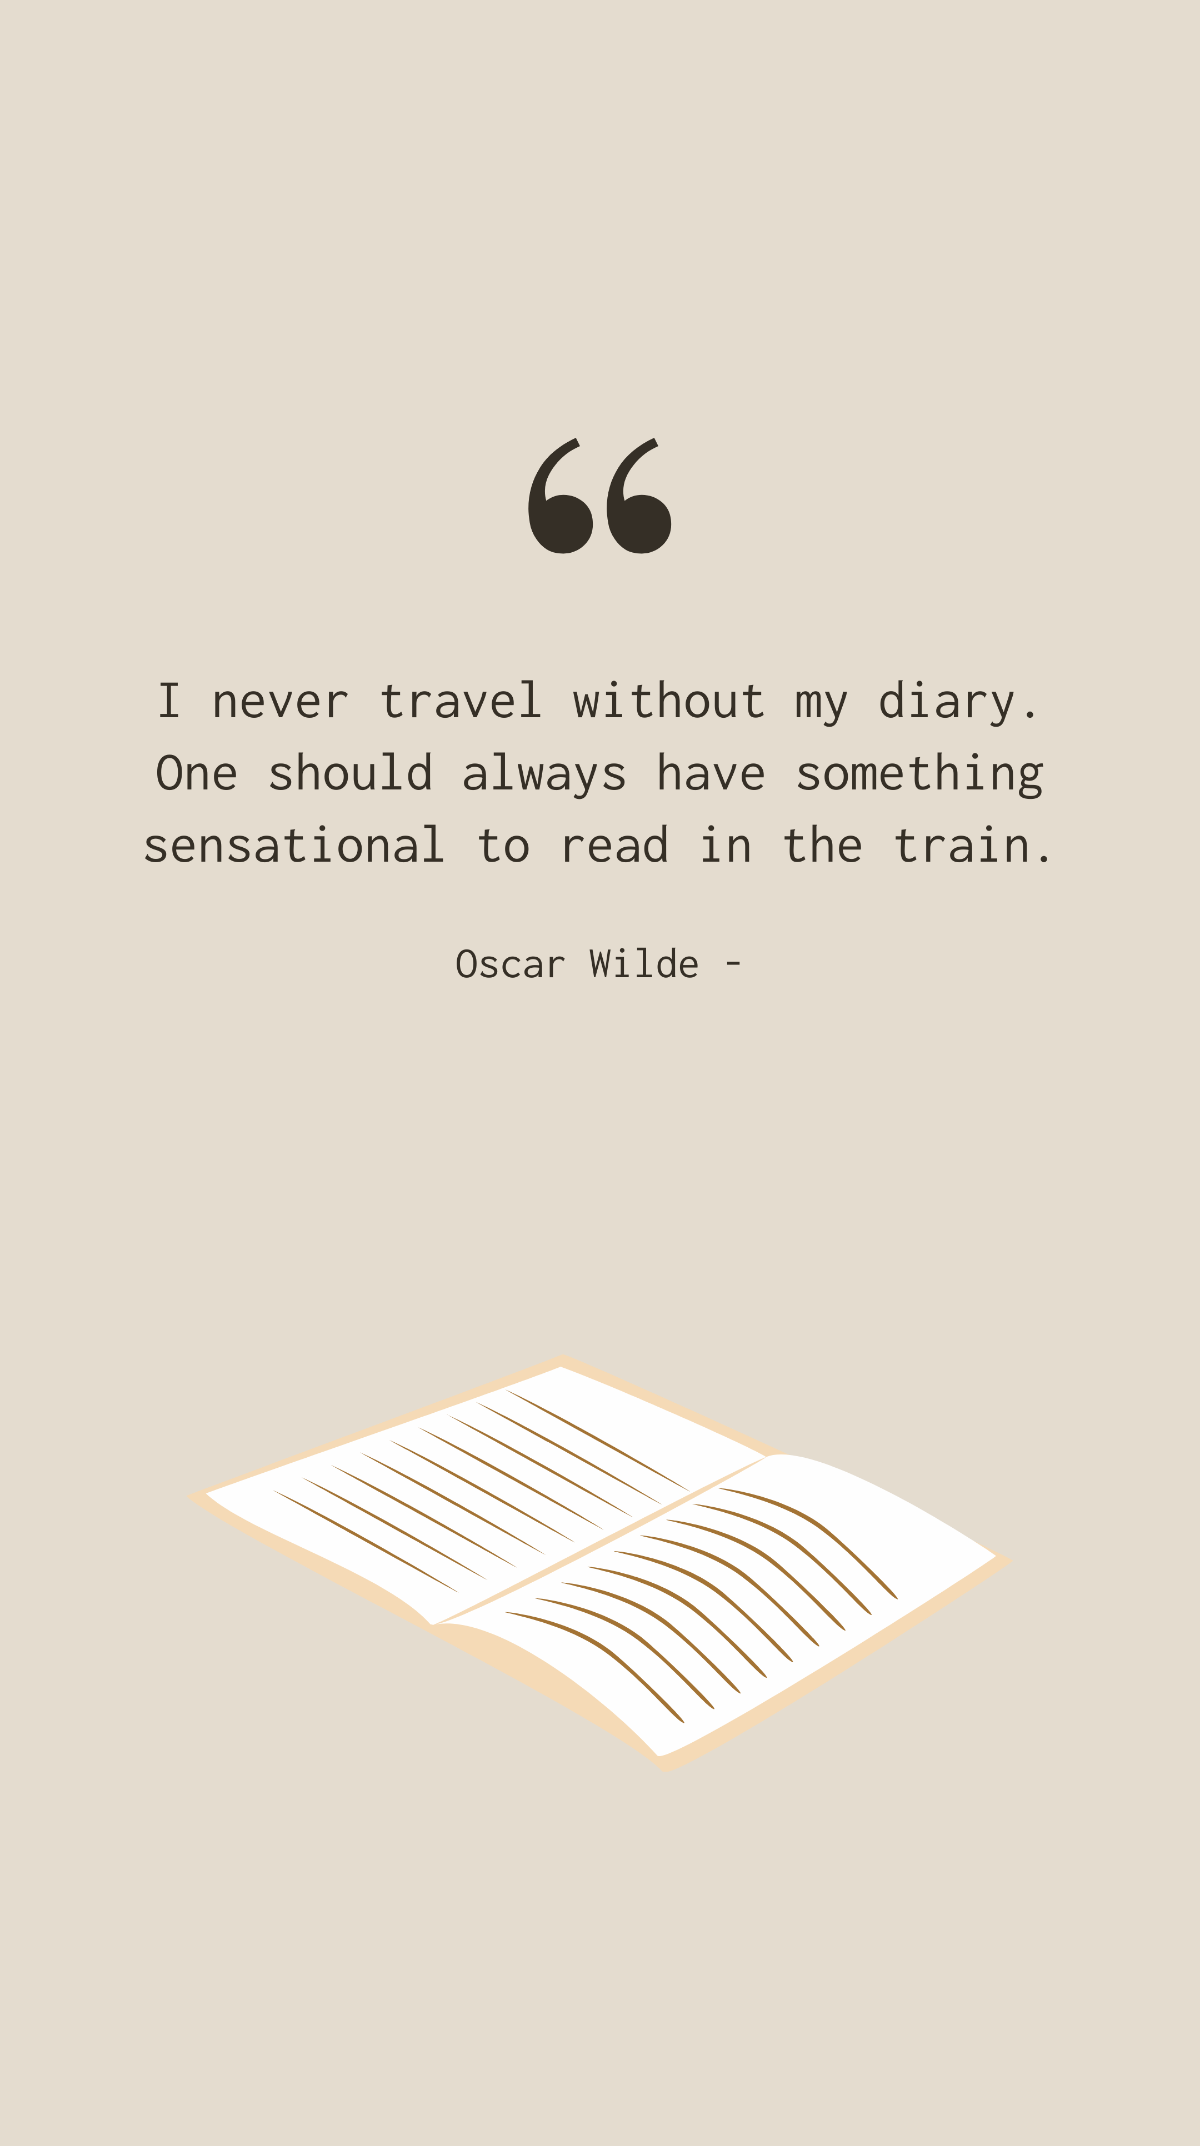 Oscar Wilde - I never travel without my diary. One should always have something sensational to read in the train. Template